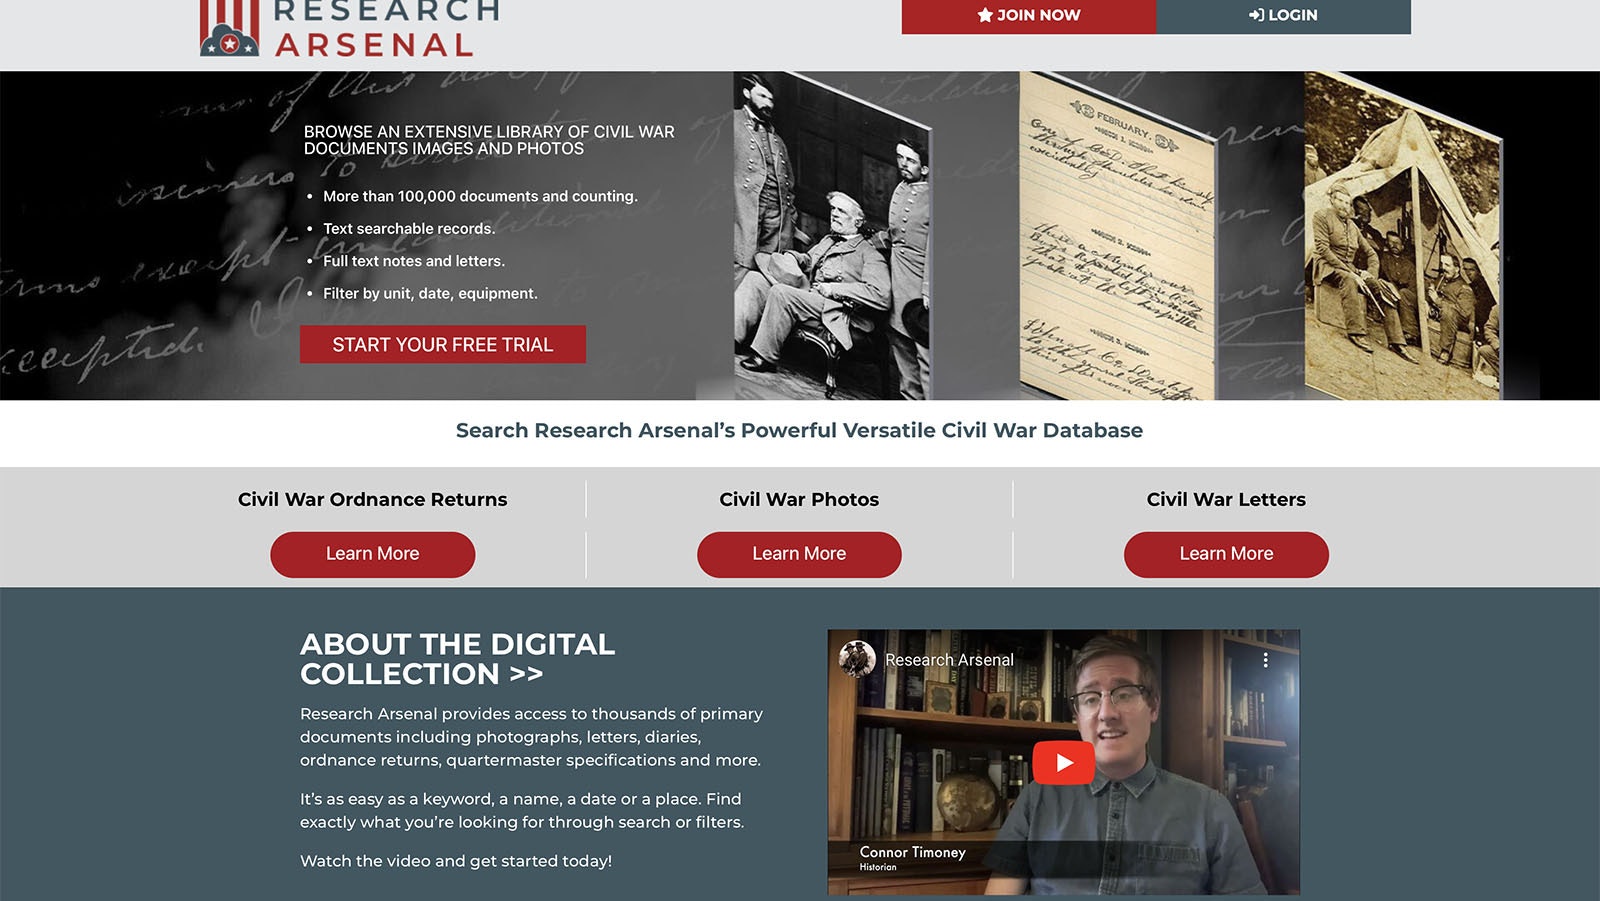 A new Casper-based website launched in June provides Civil War historians and family researchers access to thousands of Civil War documents and photos.